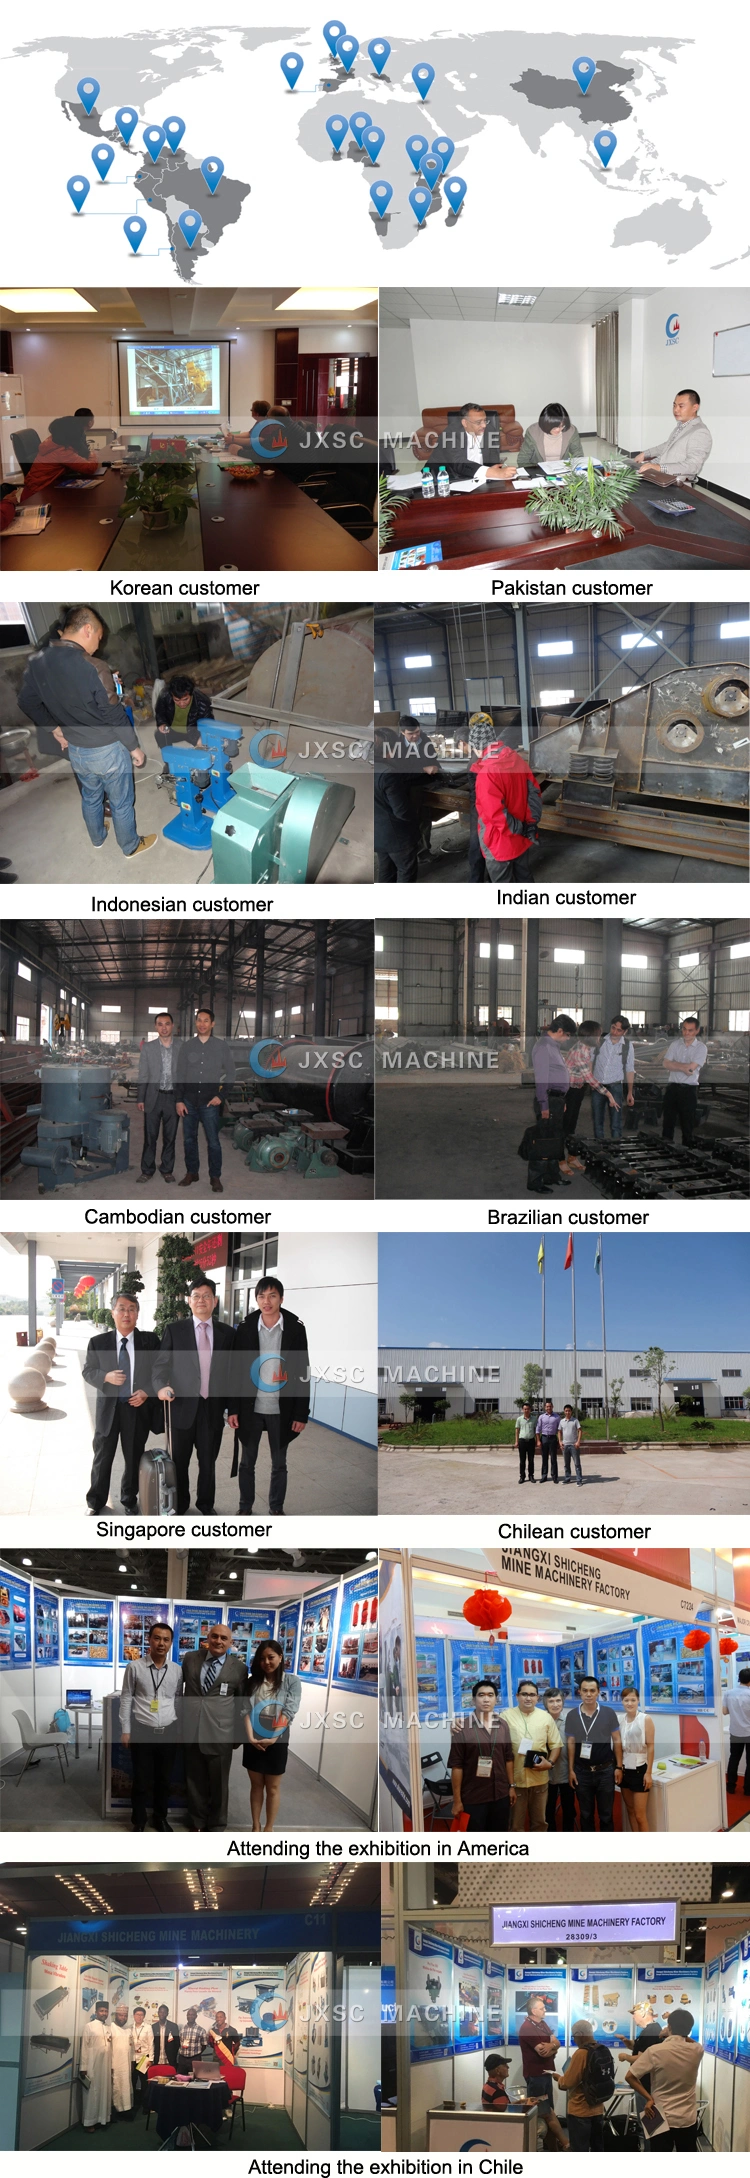 Chrome Processing Plant Industrial Silica Rotary Cylinder Drum Sand Dryer